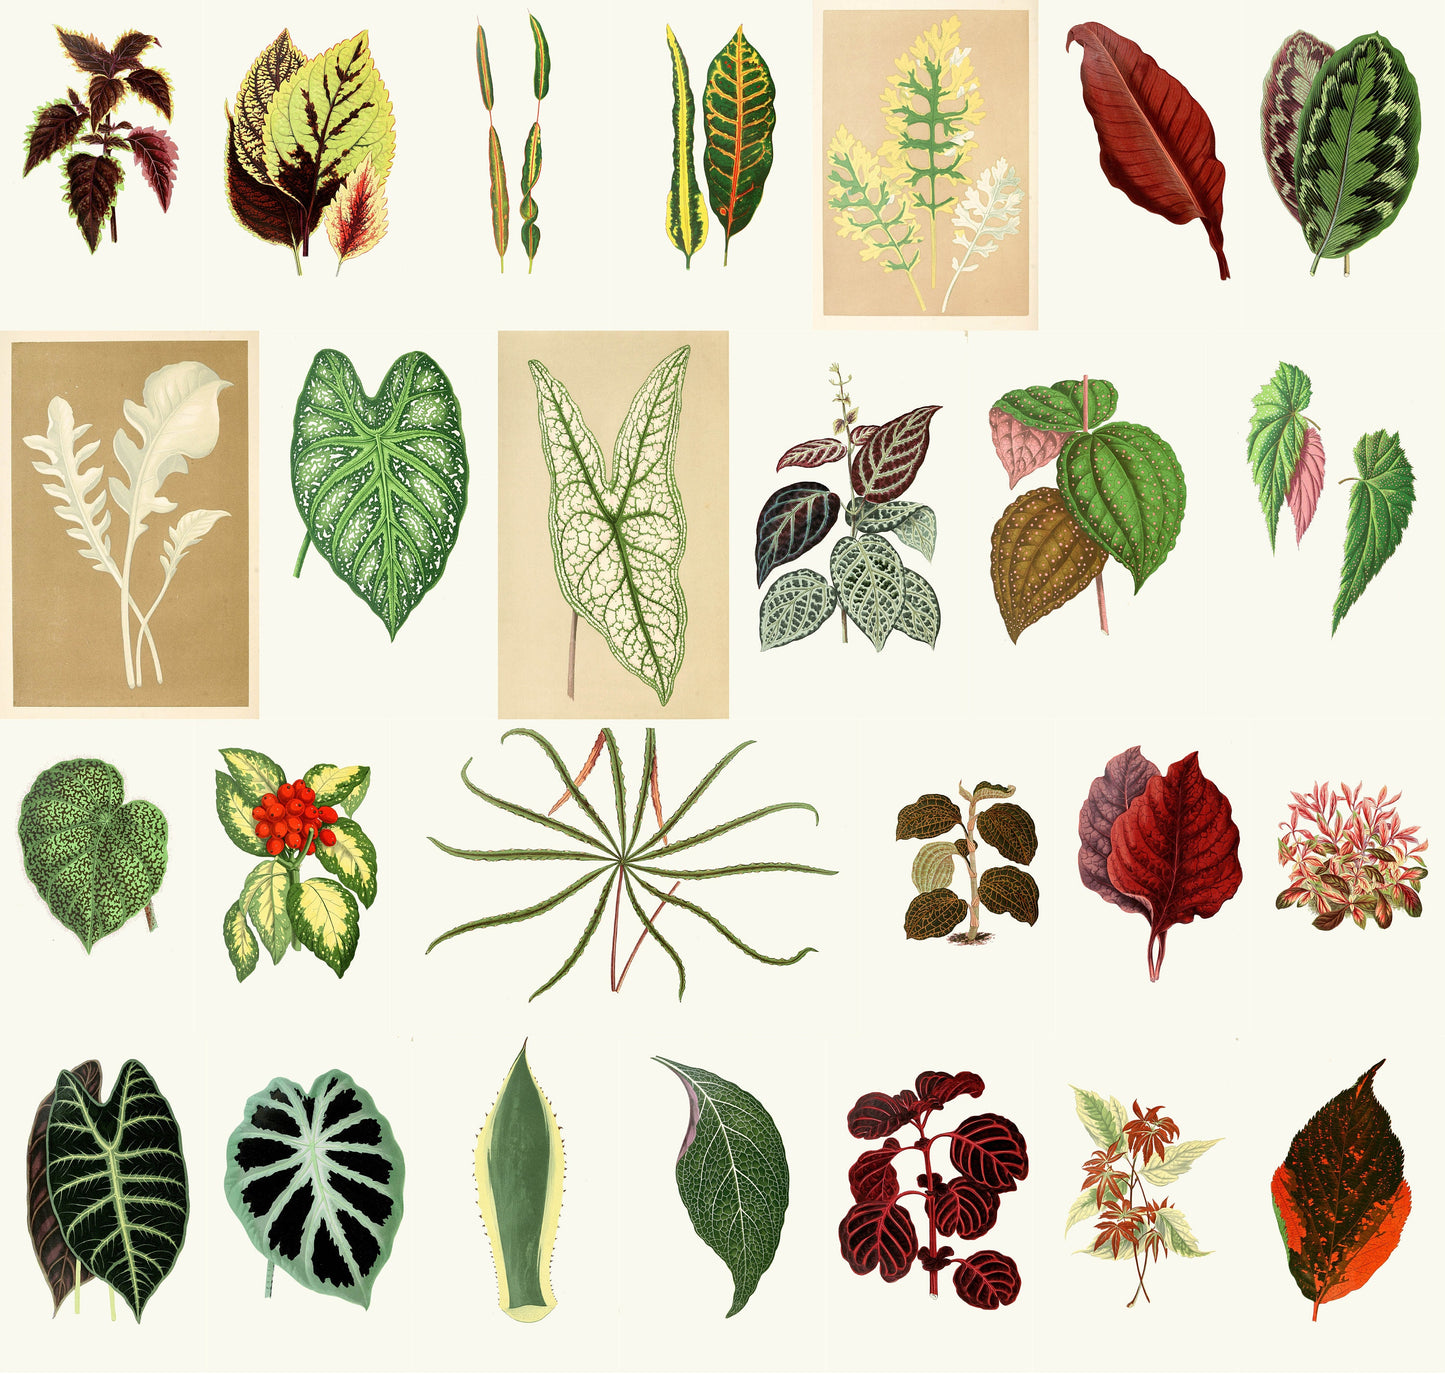 Plants with Colorful Foliage [53 Images]